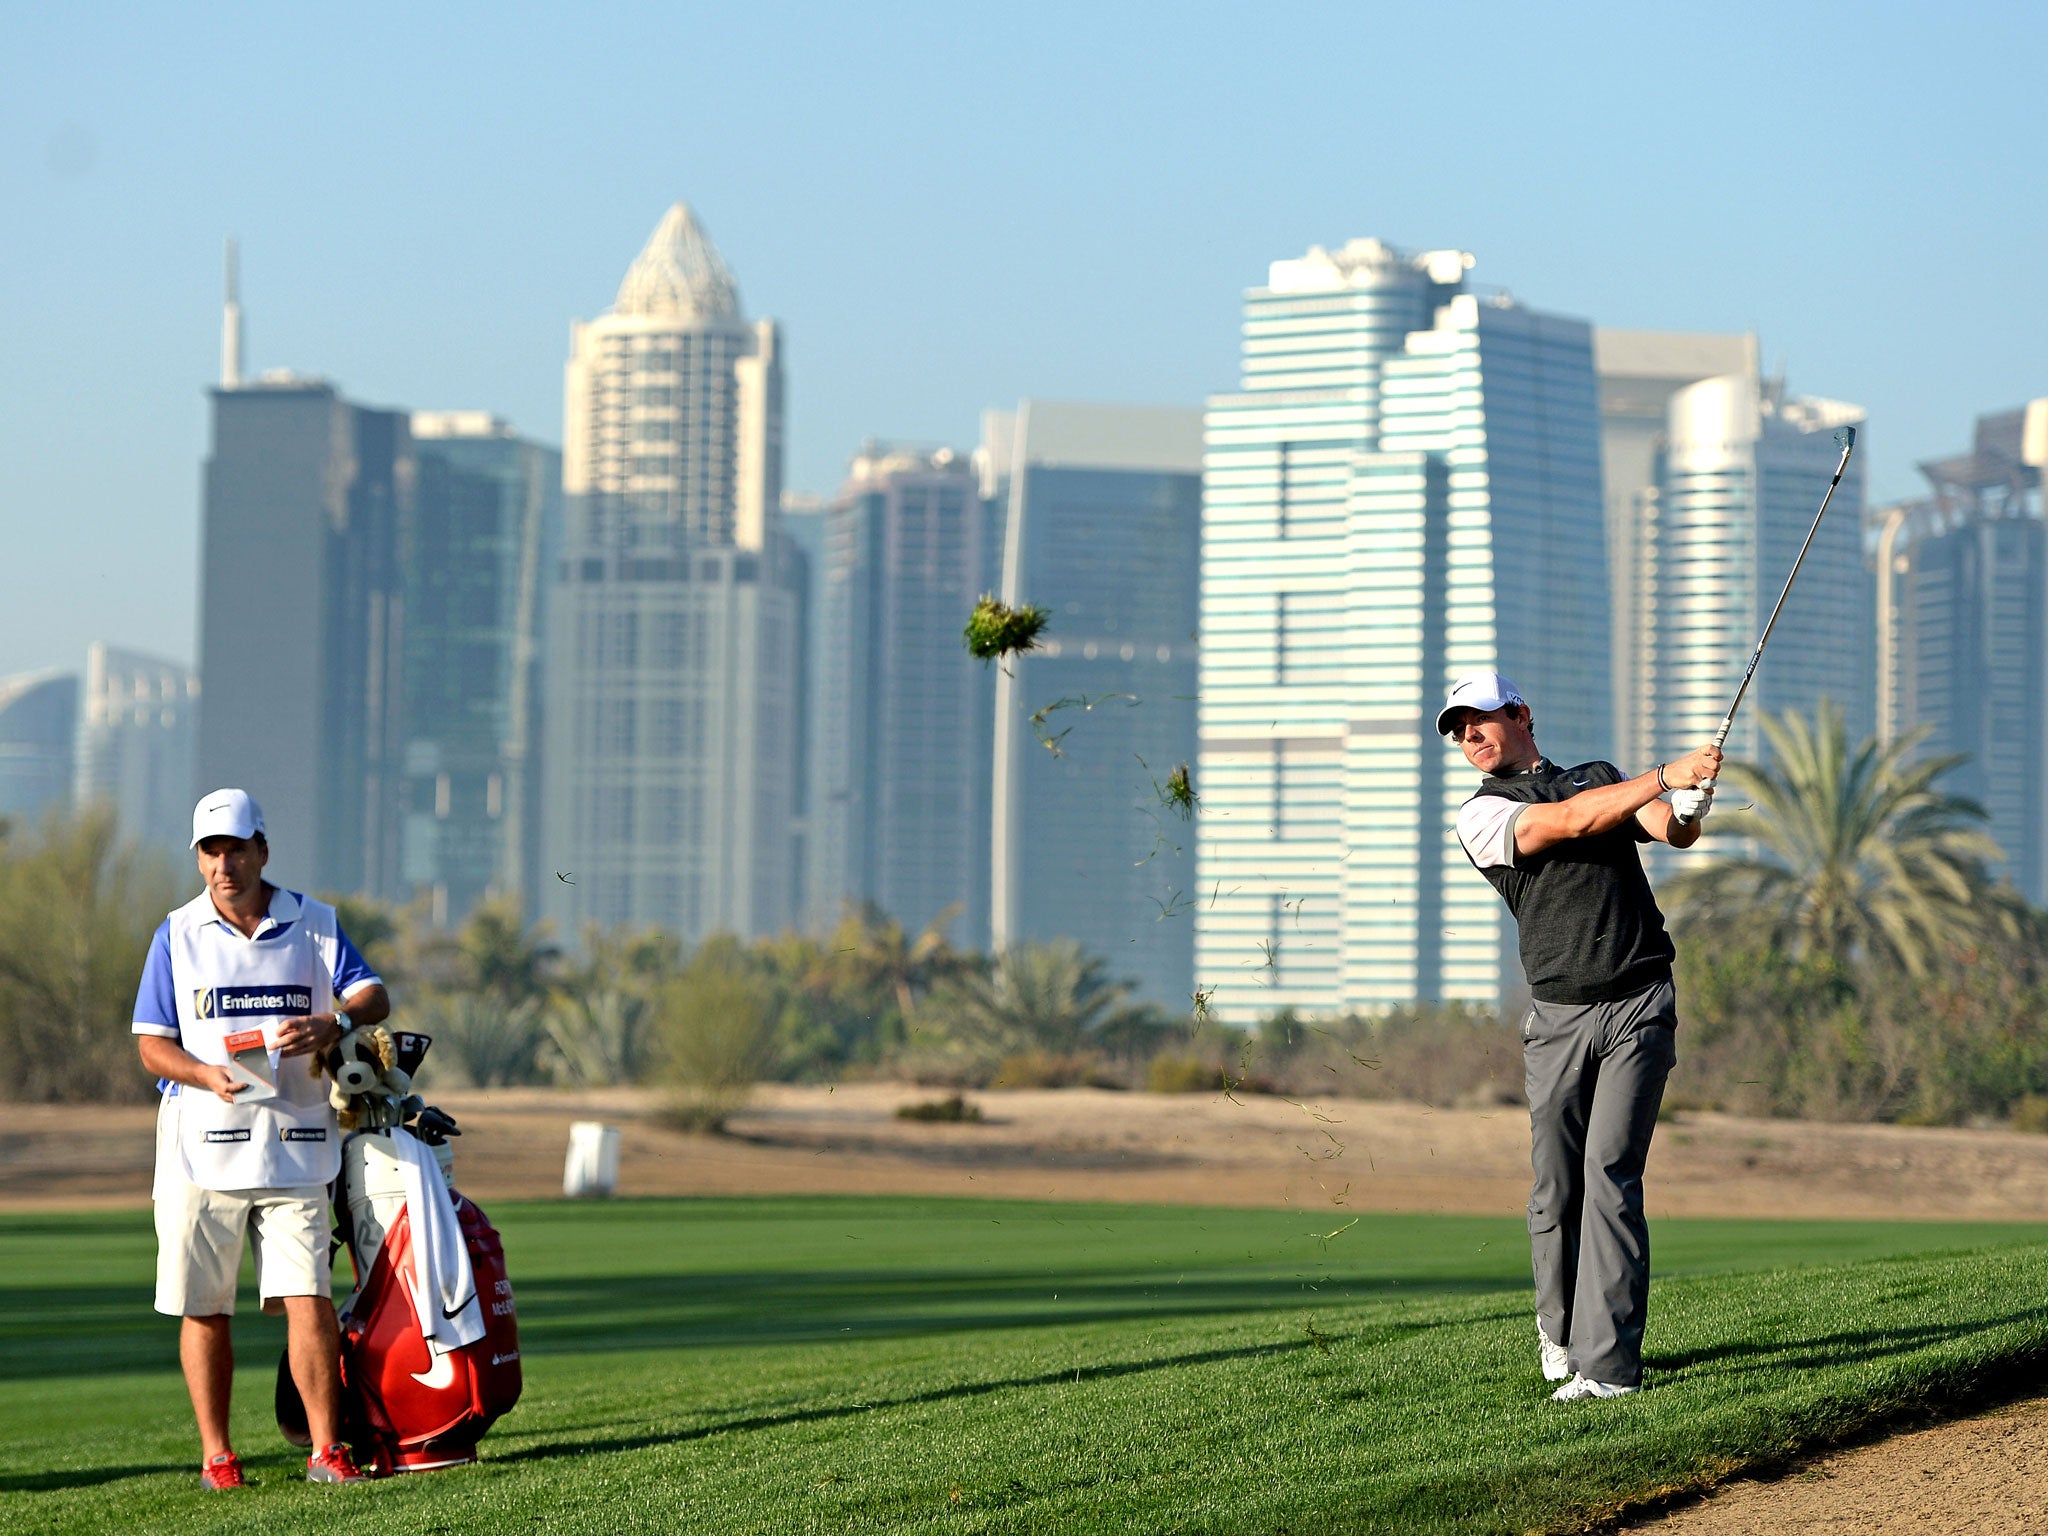 Rory McIlroy plays a shot on the 13th during the pro-am event ahead of the Dubai Desert Classic